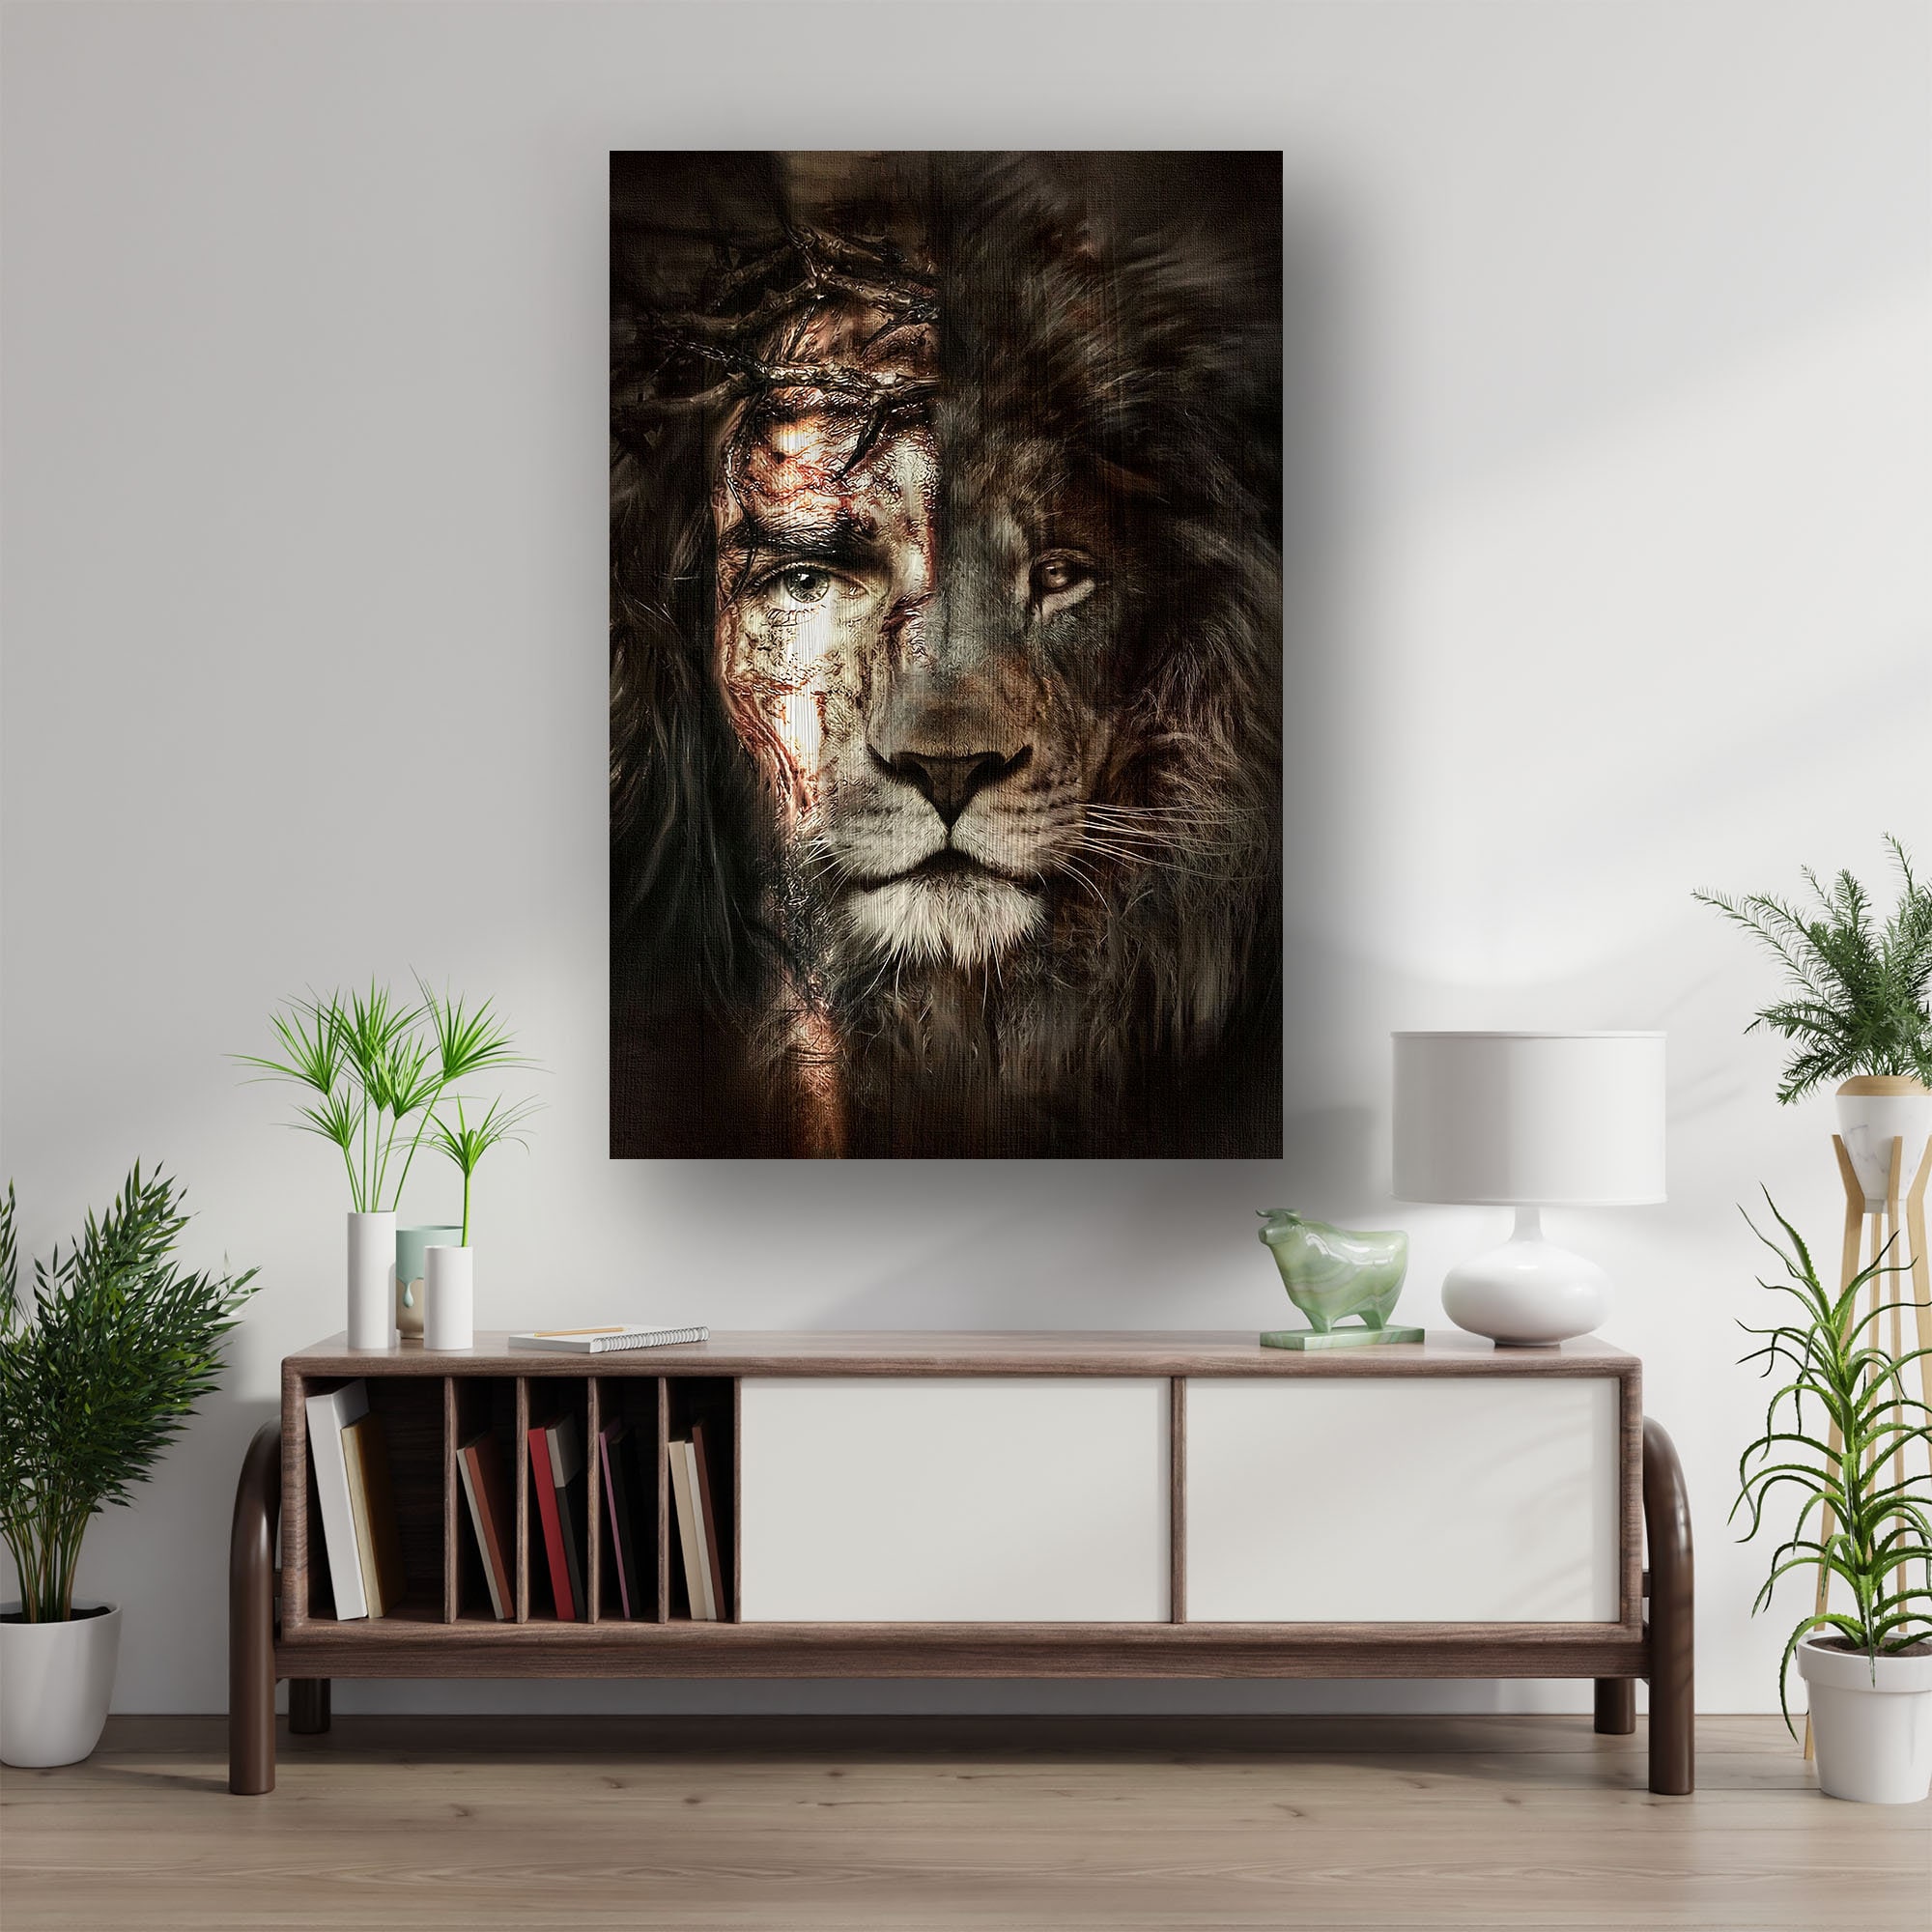 UPABLUNSO Diamond Painting Lion of Judah Christian Cross Jesus Thorn and  Crown Dove Vintage Religious Kit for Adults for Wall Home Decor 12x16 Inch